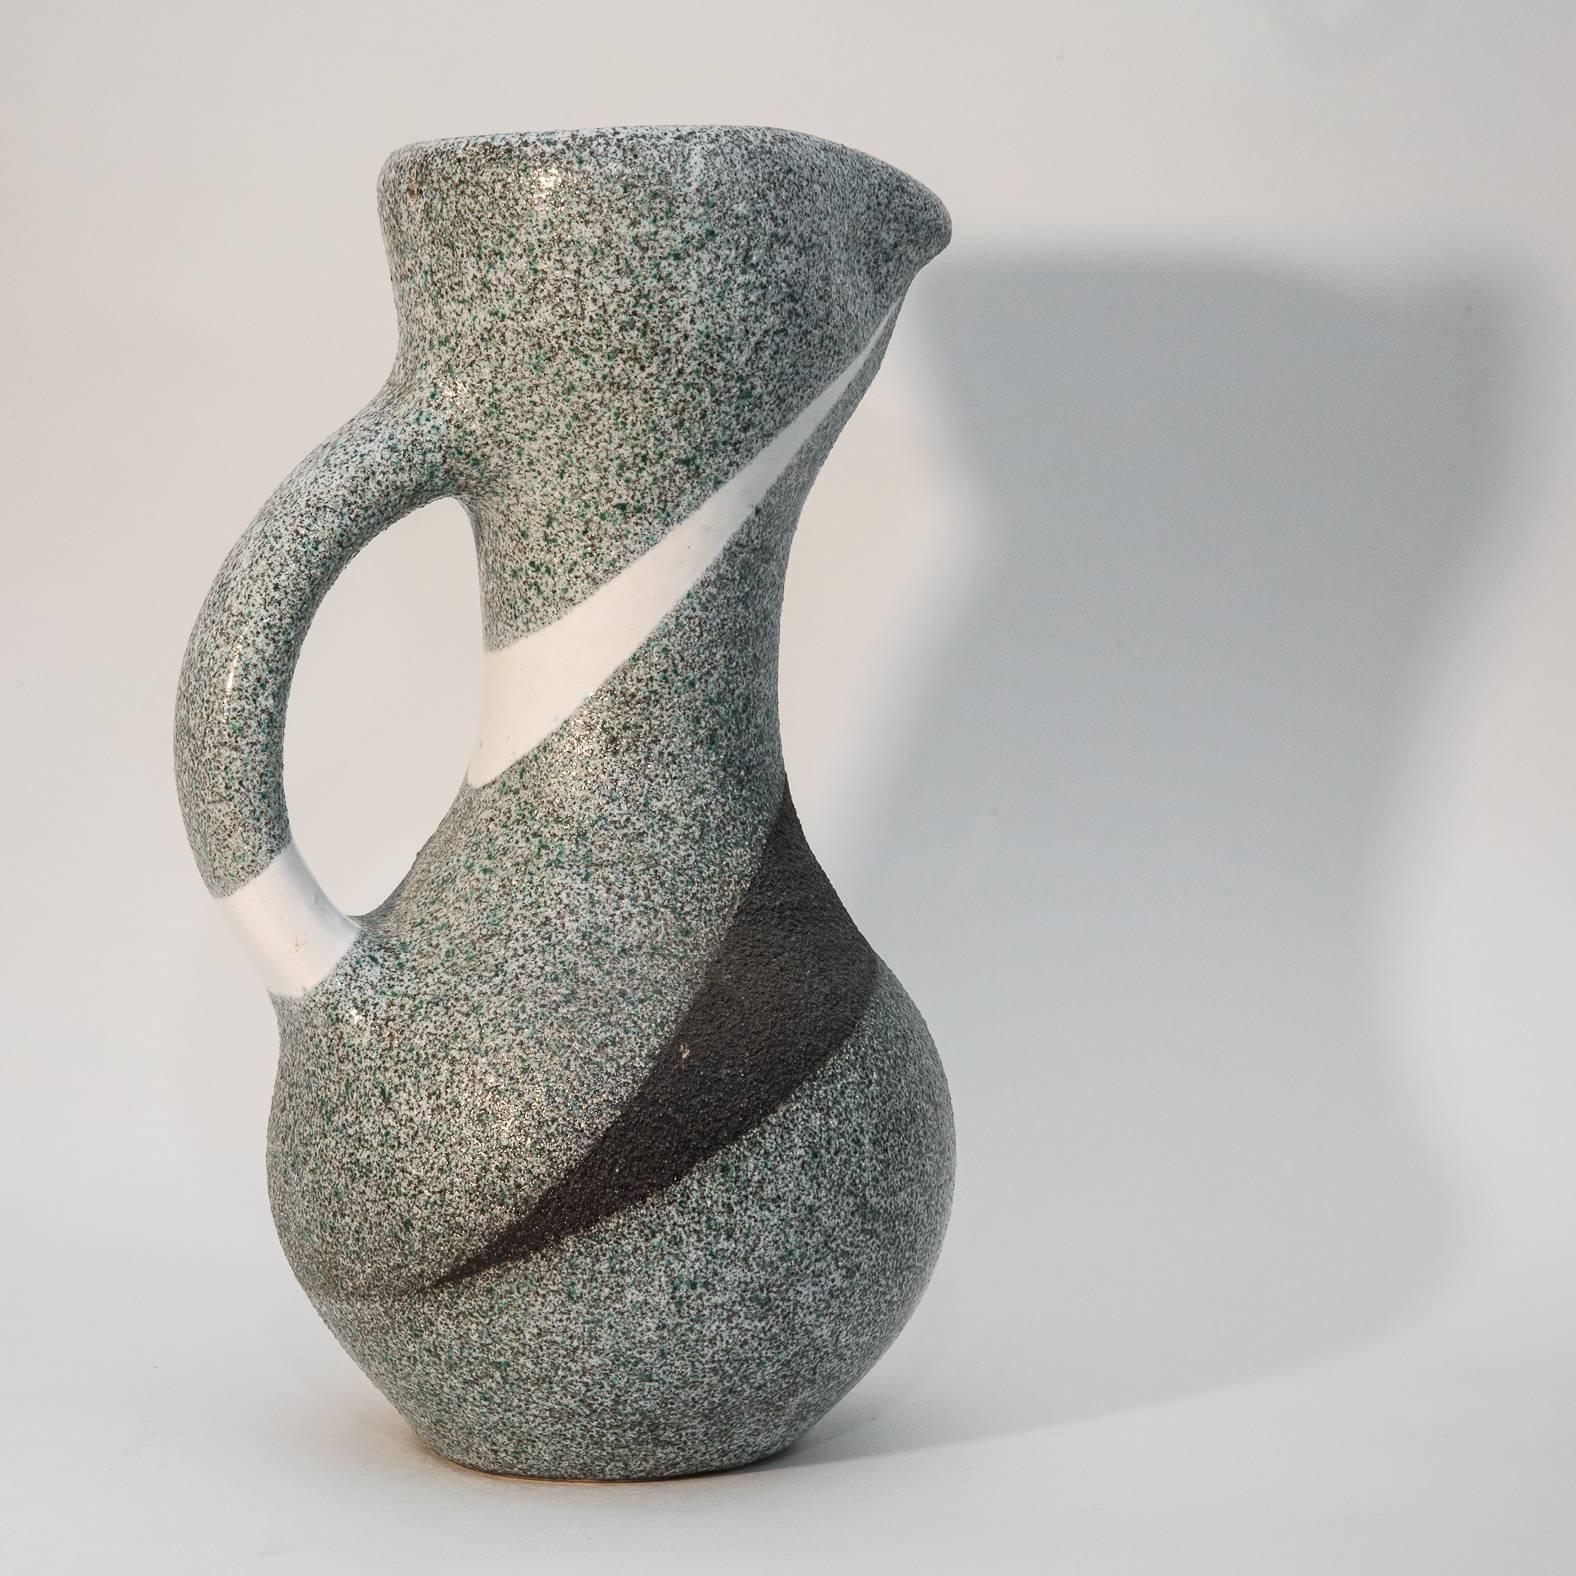 A large zoomorphic abstract ceramic pitcher by Gilbert Valentin, one of the Vallauris leading figures and close friend of Picasso who had his ceramic studio across the street at the time
Signed.